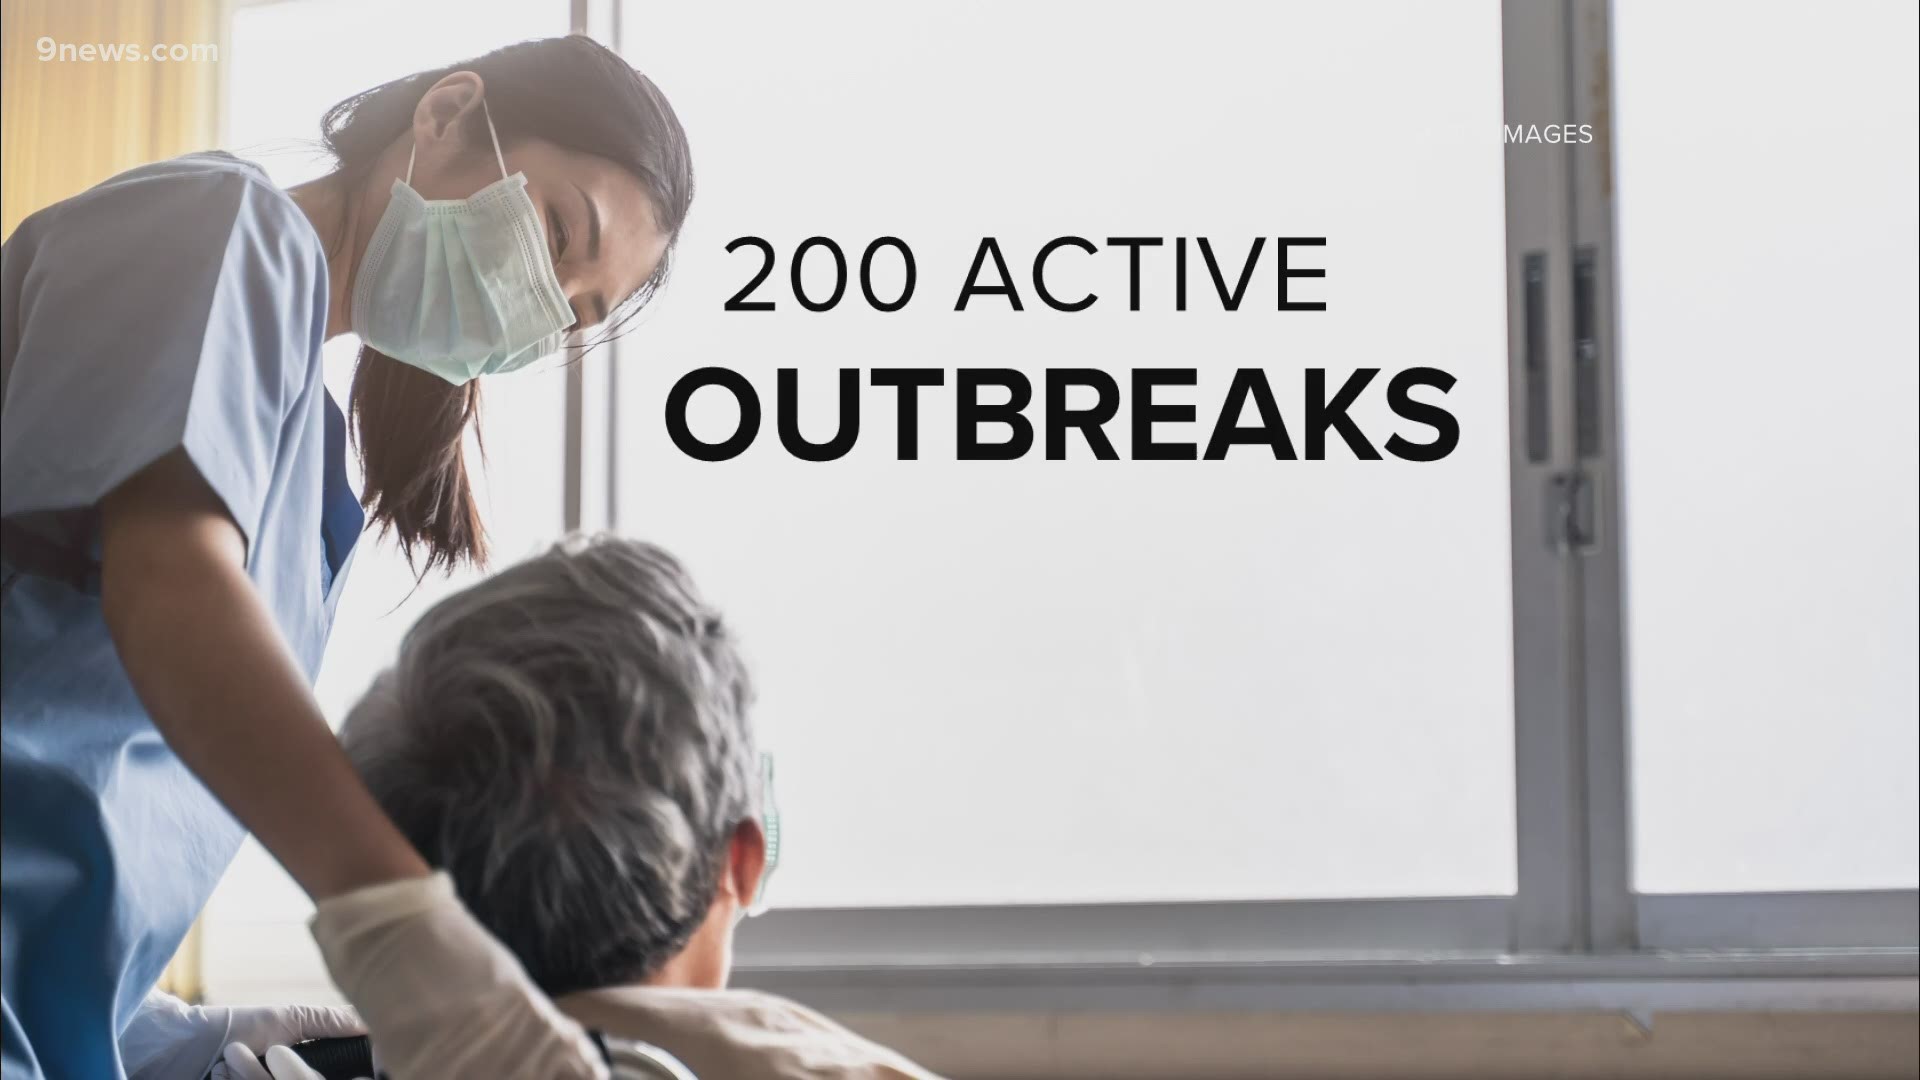 Data from the Colorado Department of Health and Environment shows nursing home COVID outbreaks account for the deadliest outbreaks in the state.